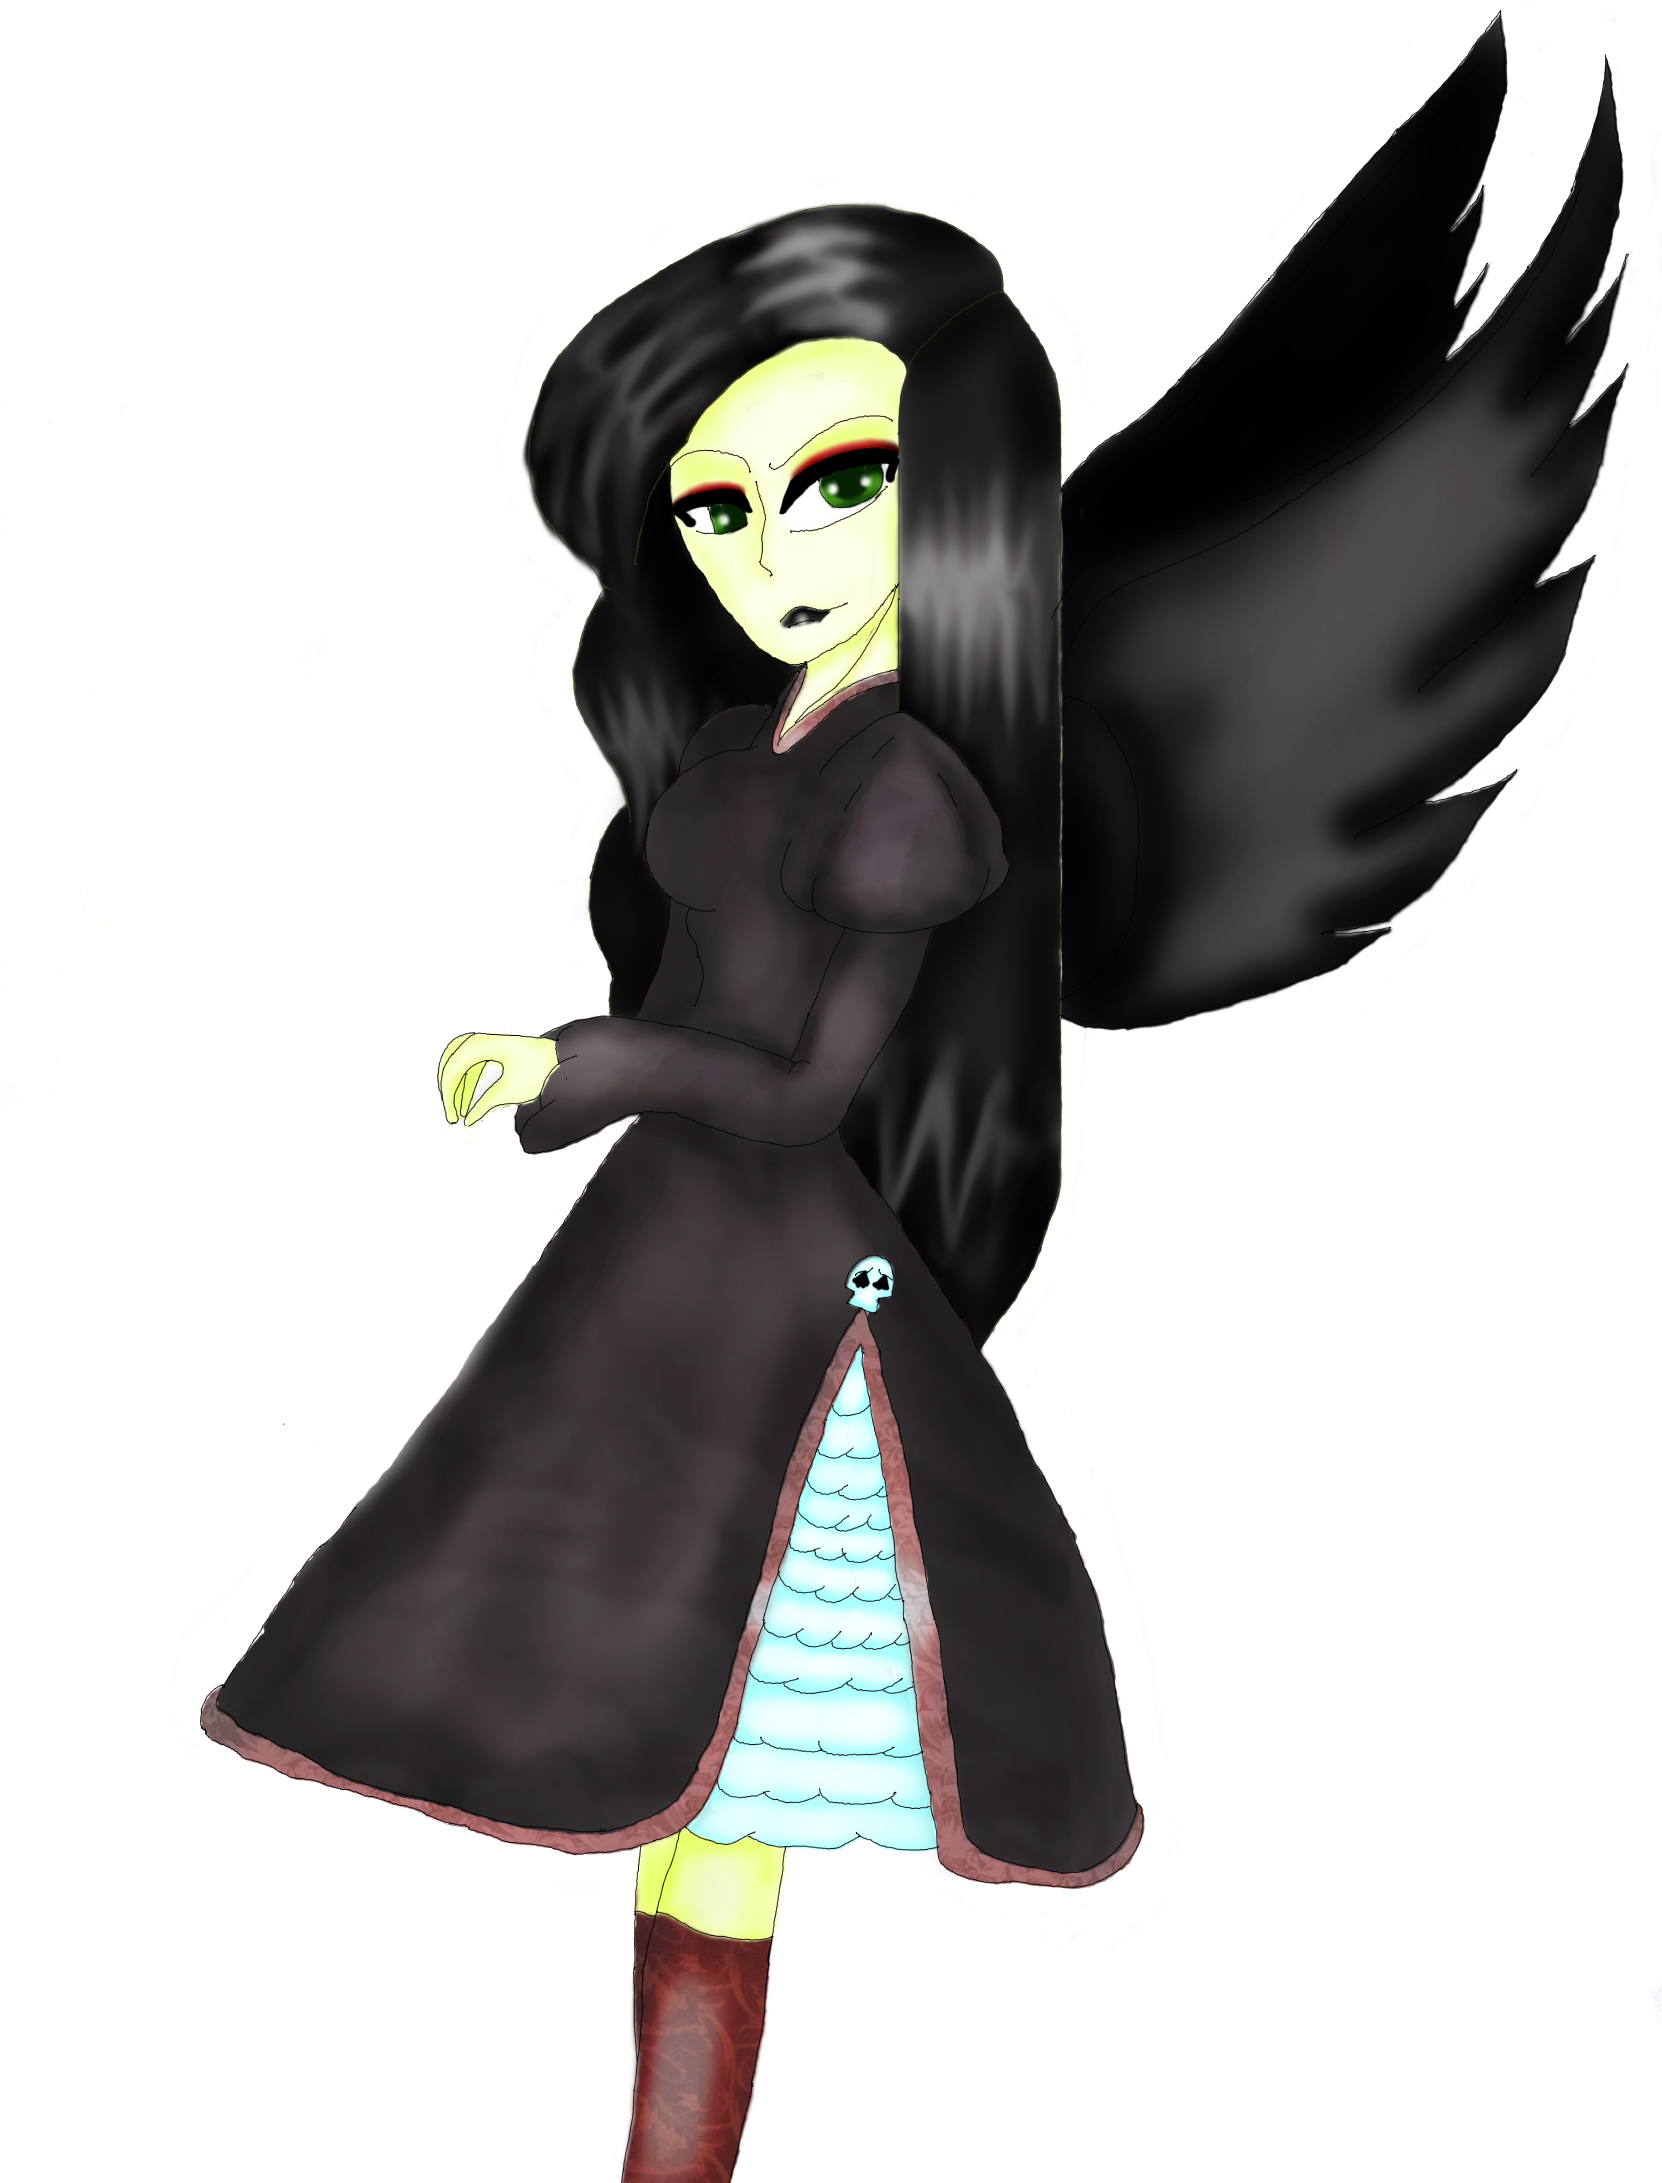 Goth Shego by ravenfire74